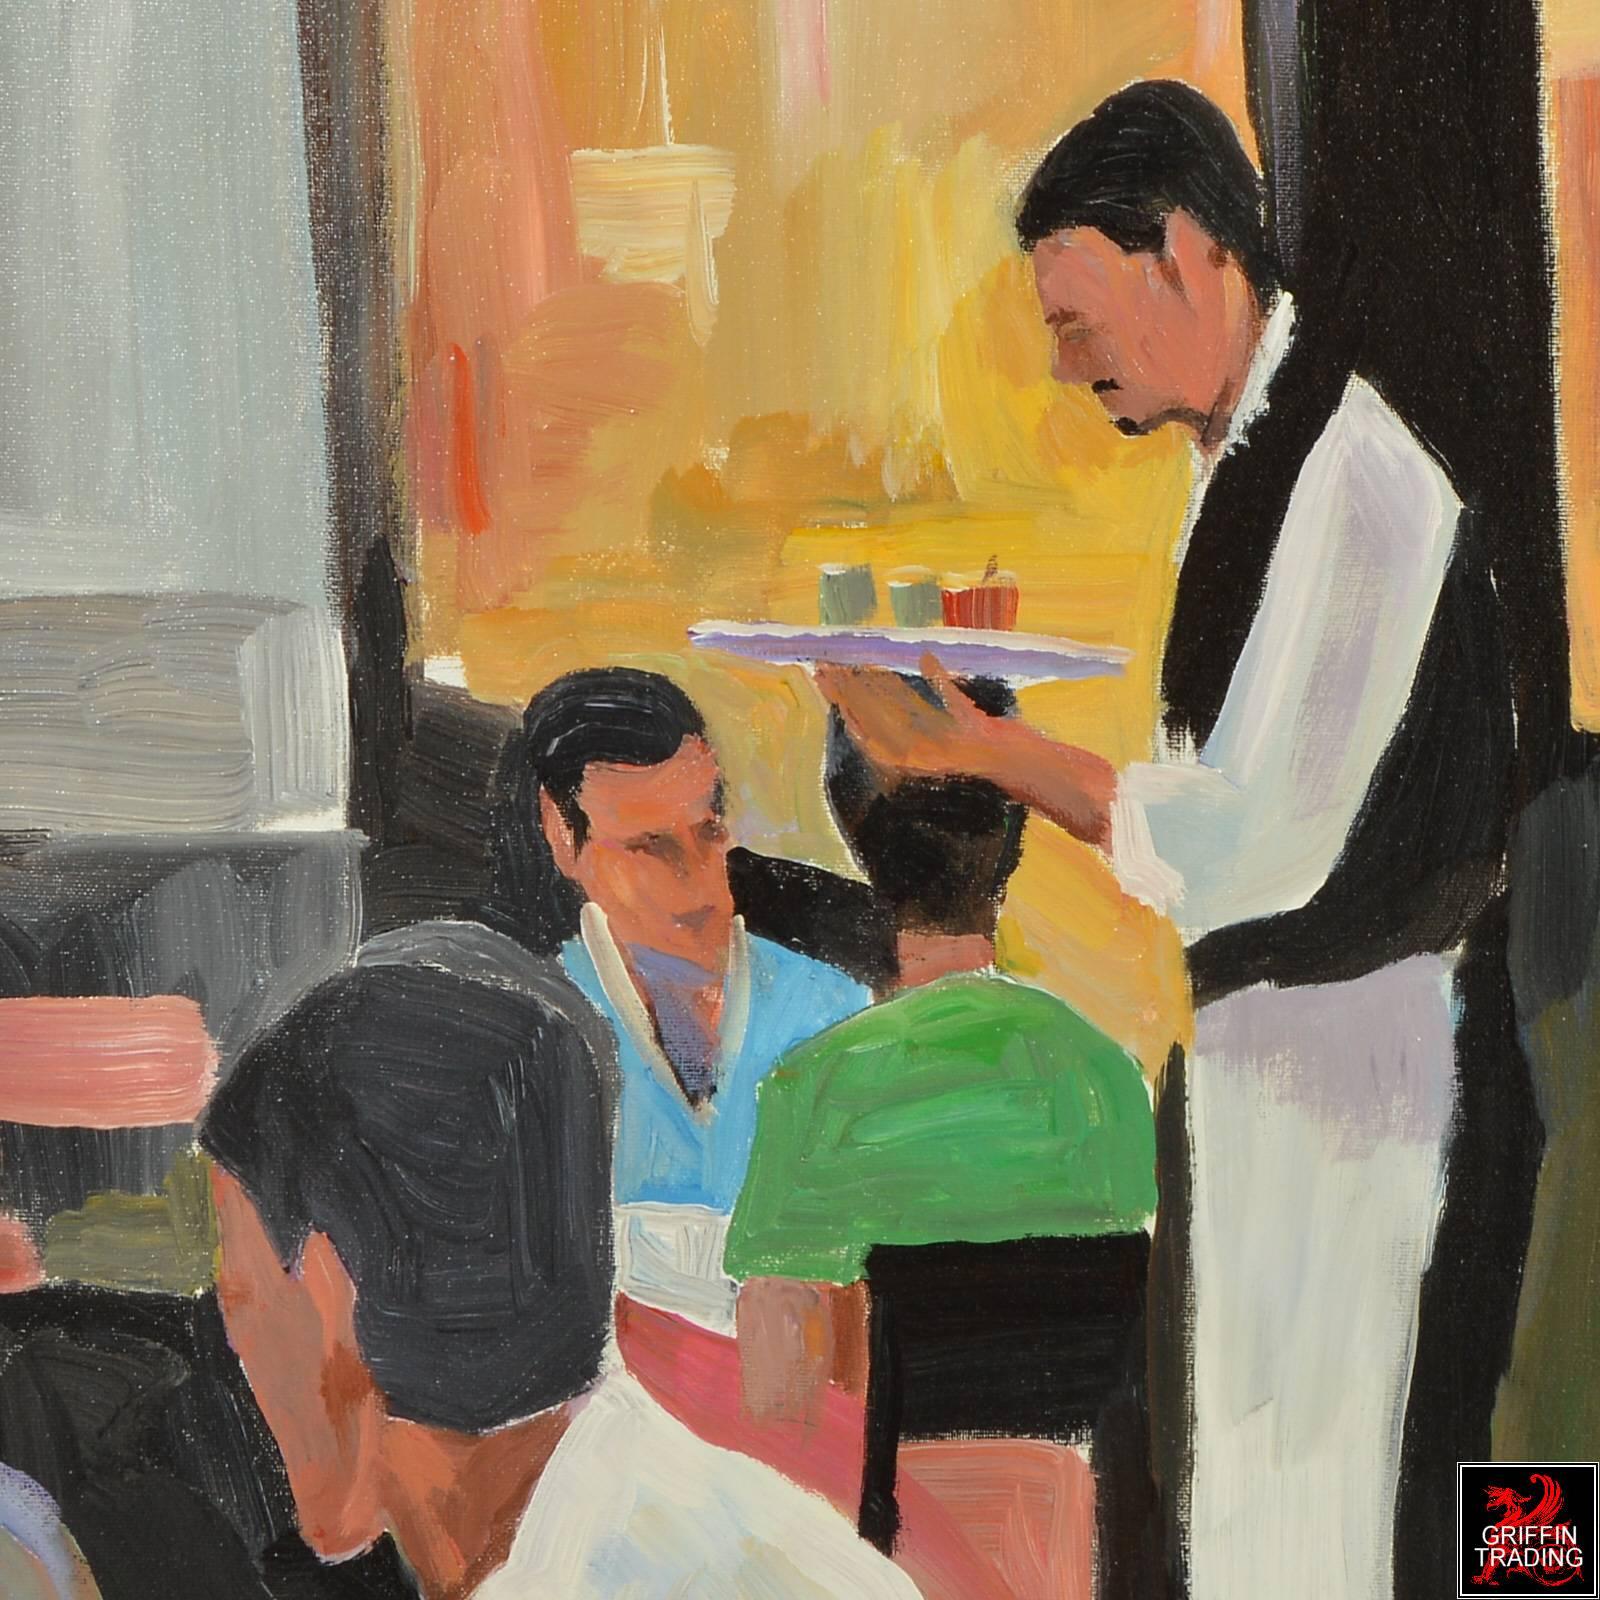 Modern Le Cafe French Restaurant Scene Signed Original Painting For Sale